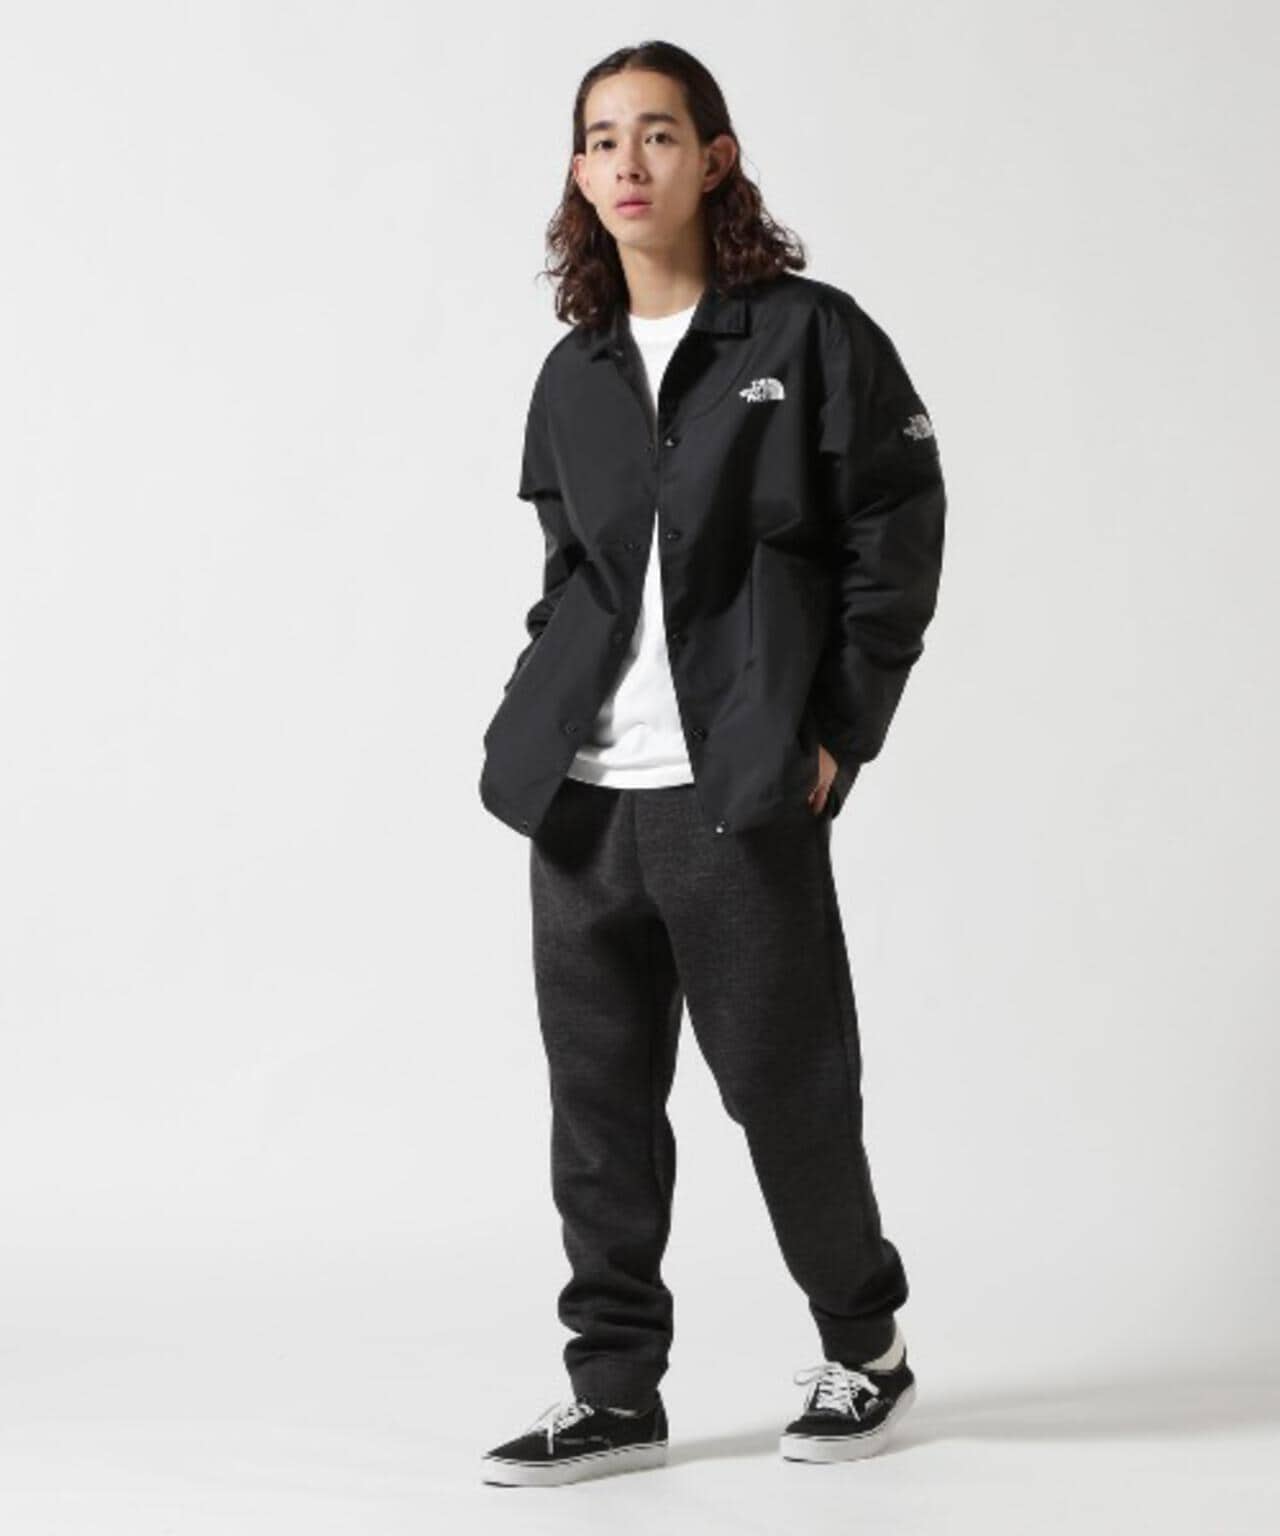 THE NORTH FACE/ザ・ノースフェイス The Coach Jacket | BEAVER 